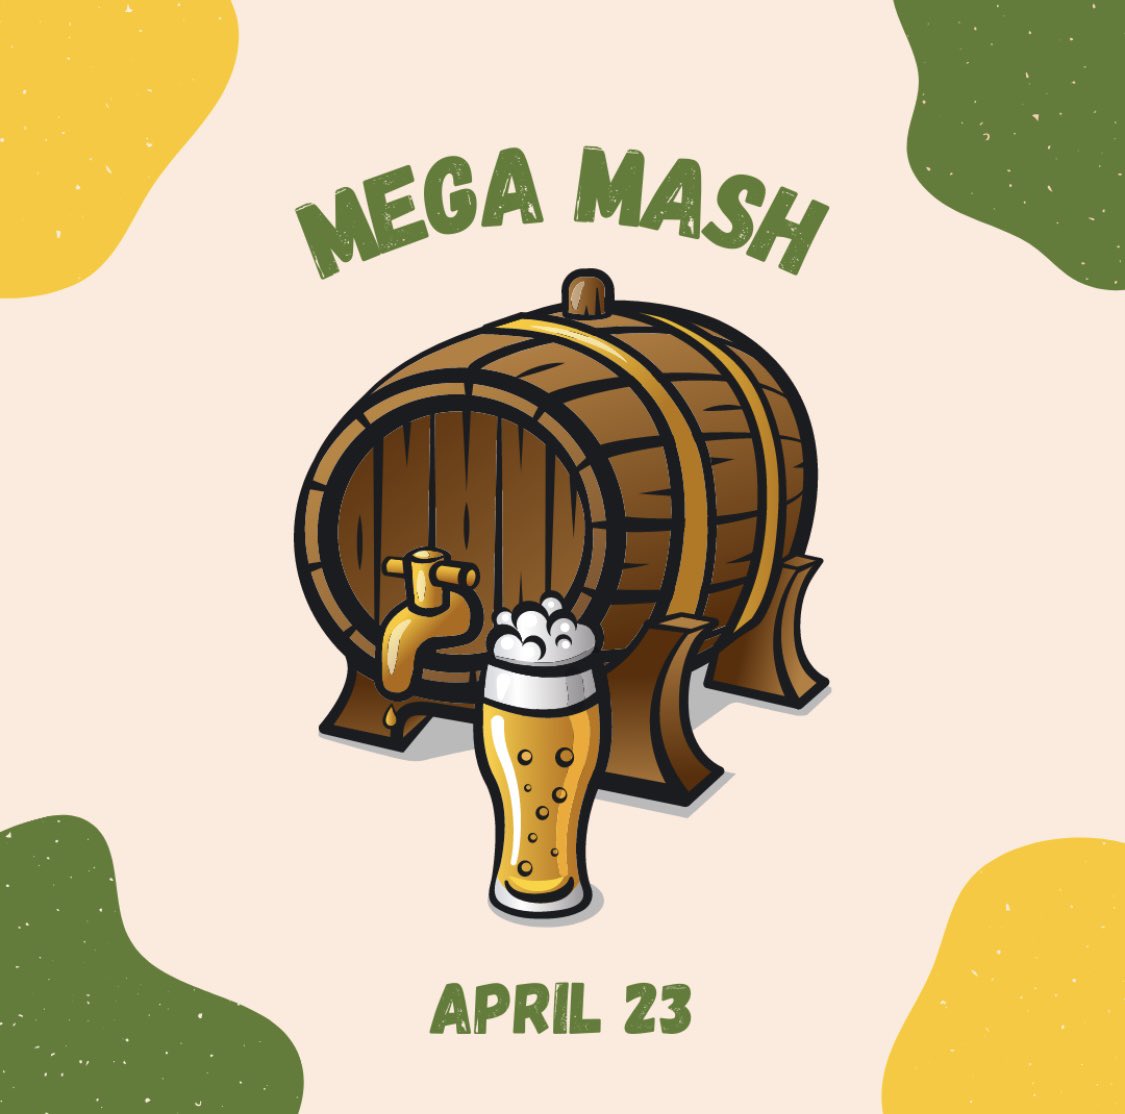 1/2

#MEGAMASH is selling FAST & WE'RE LESS THAN 2 WEEKS AWAY! DON'T miss out!!

(Formerly known as #BIGBREW) MEGAMASH is on April 23 - reserve your carboy fills NOW!

As always, @alleykatbeer is generously allowing us to use their equipment to produce a suburb #Witbier wort ..